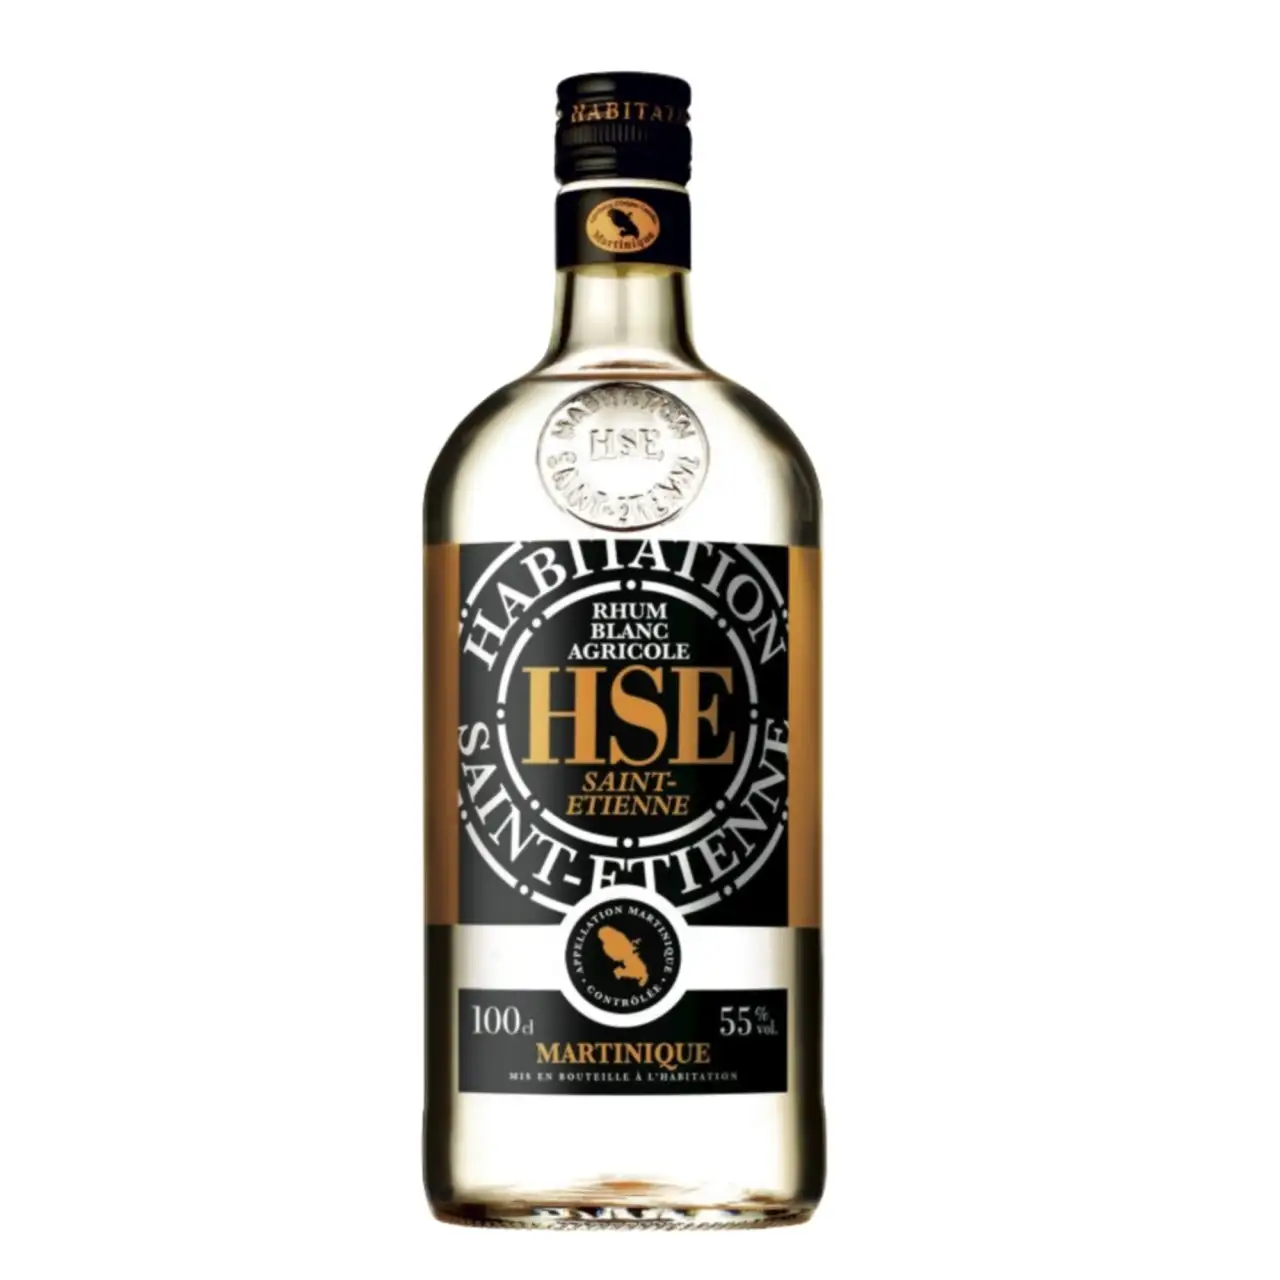 Image of the front of the bottle of the rum HSE Blanc